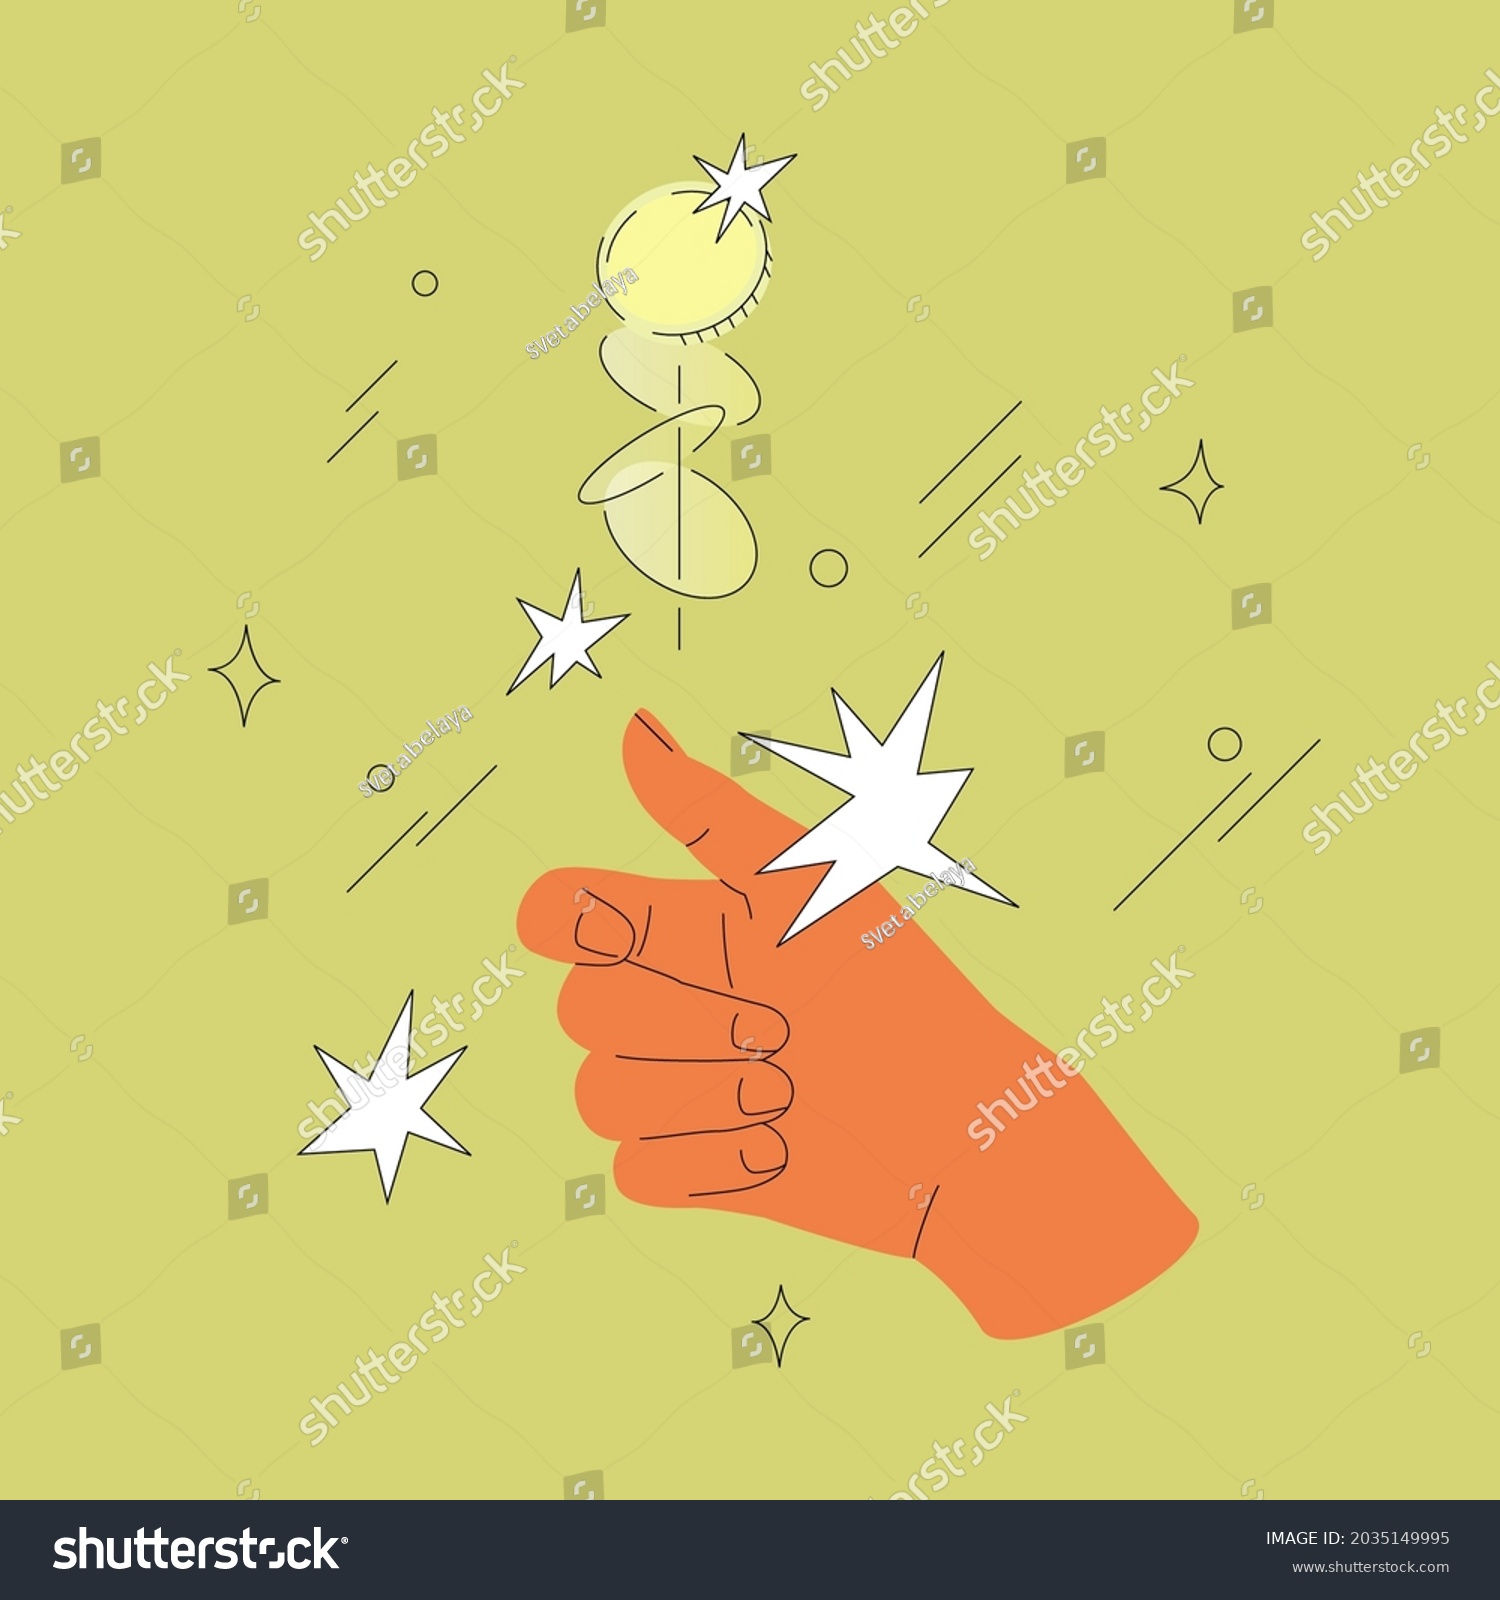 SVG of Hand flips or toss coin vector illustration isolated on a green background. Contemporary comic design. Making decision concept. svg